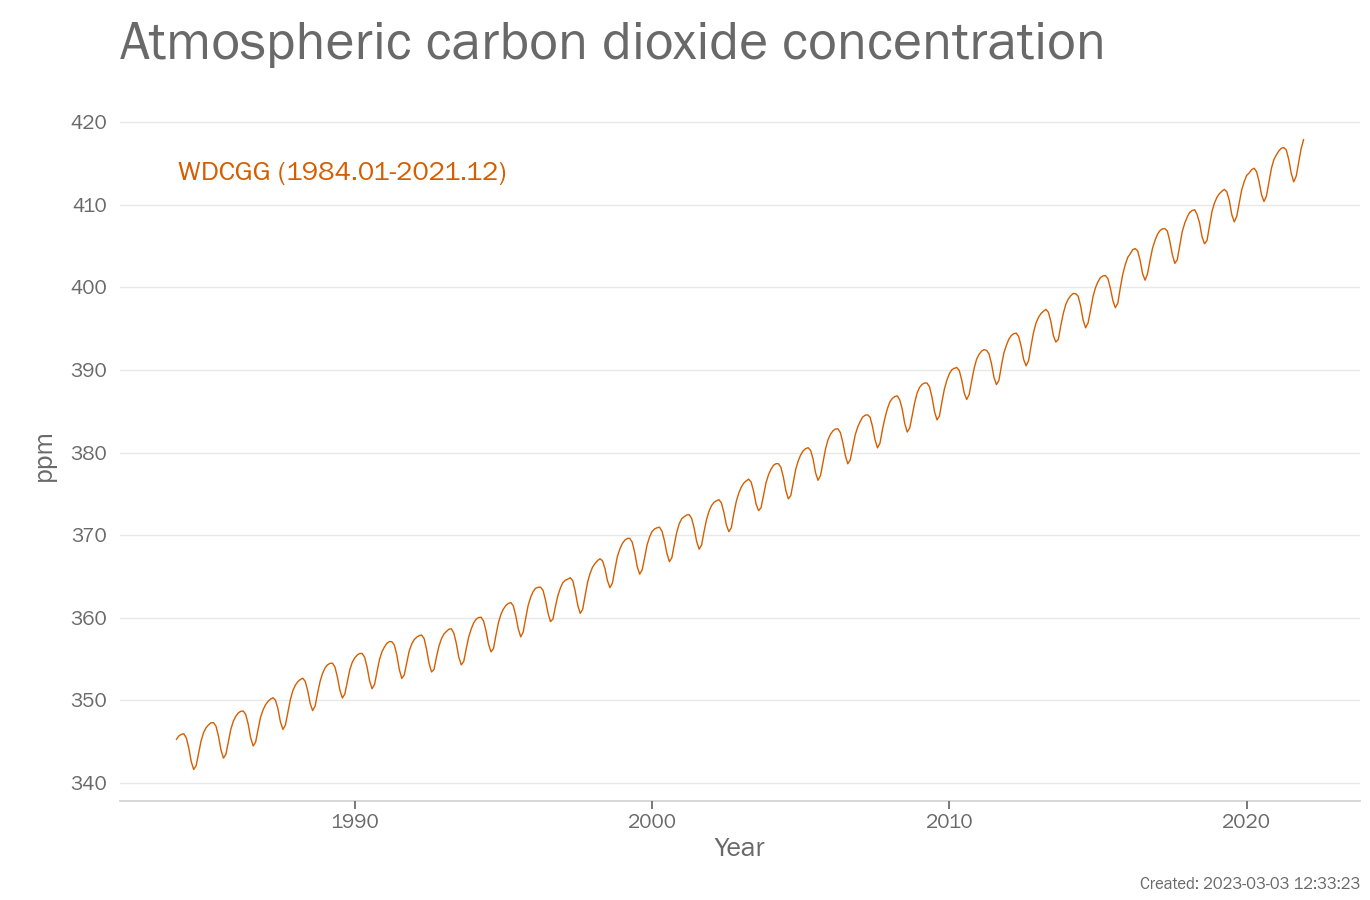 Monthly Atmospheric concentration of carbon dioxide (ppm)  from 1984-2021. Data are from WDCGG.